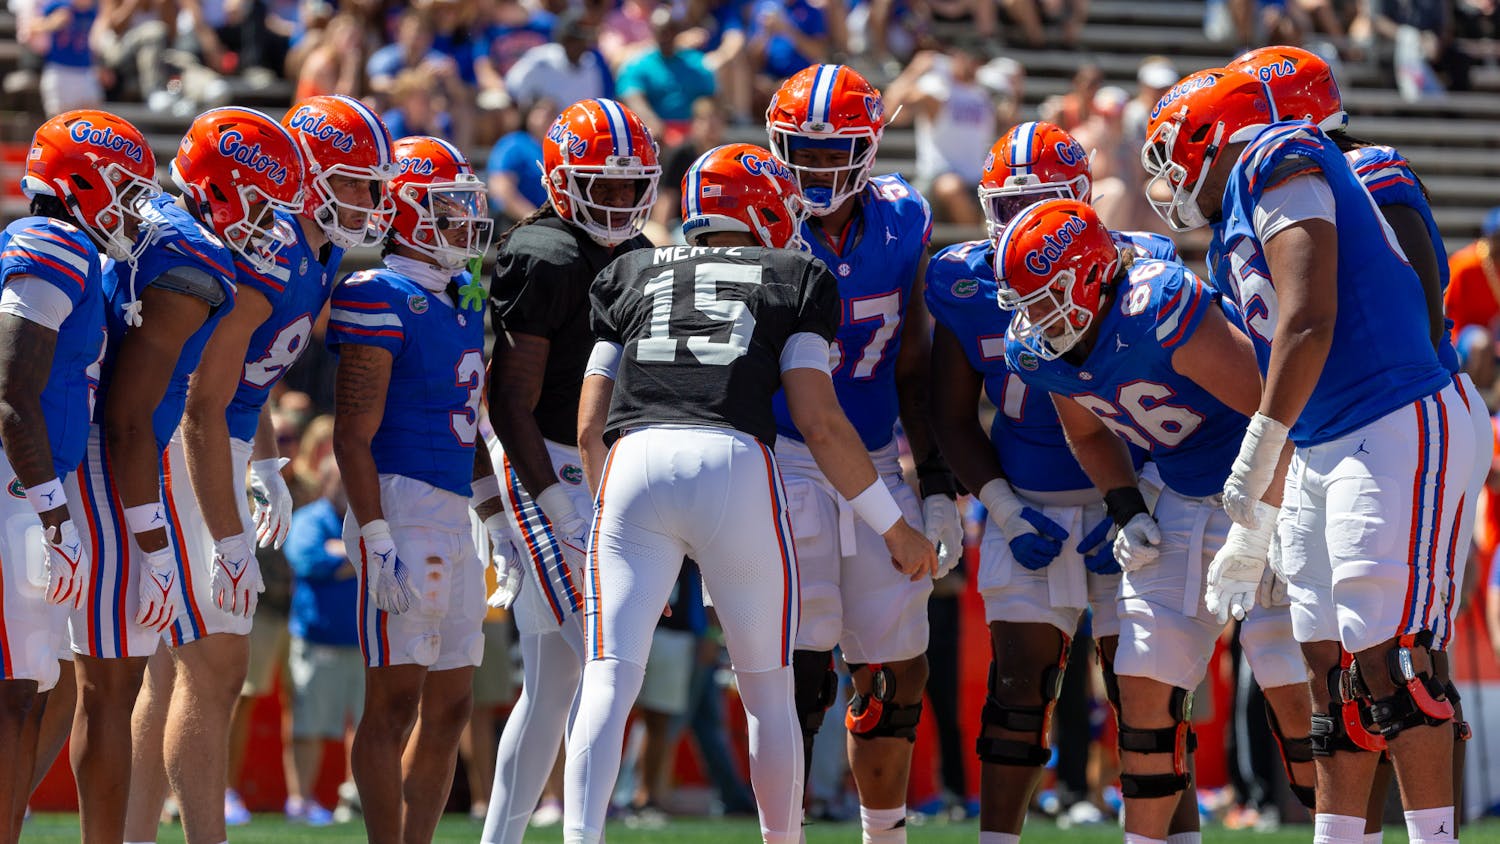 Florida quarterback Graham Mertz in the huddle with his Blue team during the Orange and Blue Game on Saturday, April 13. Photo by Ryan Friedenberg